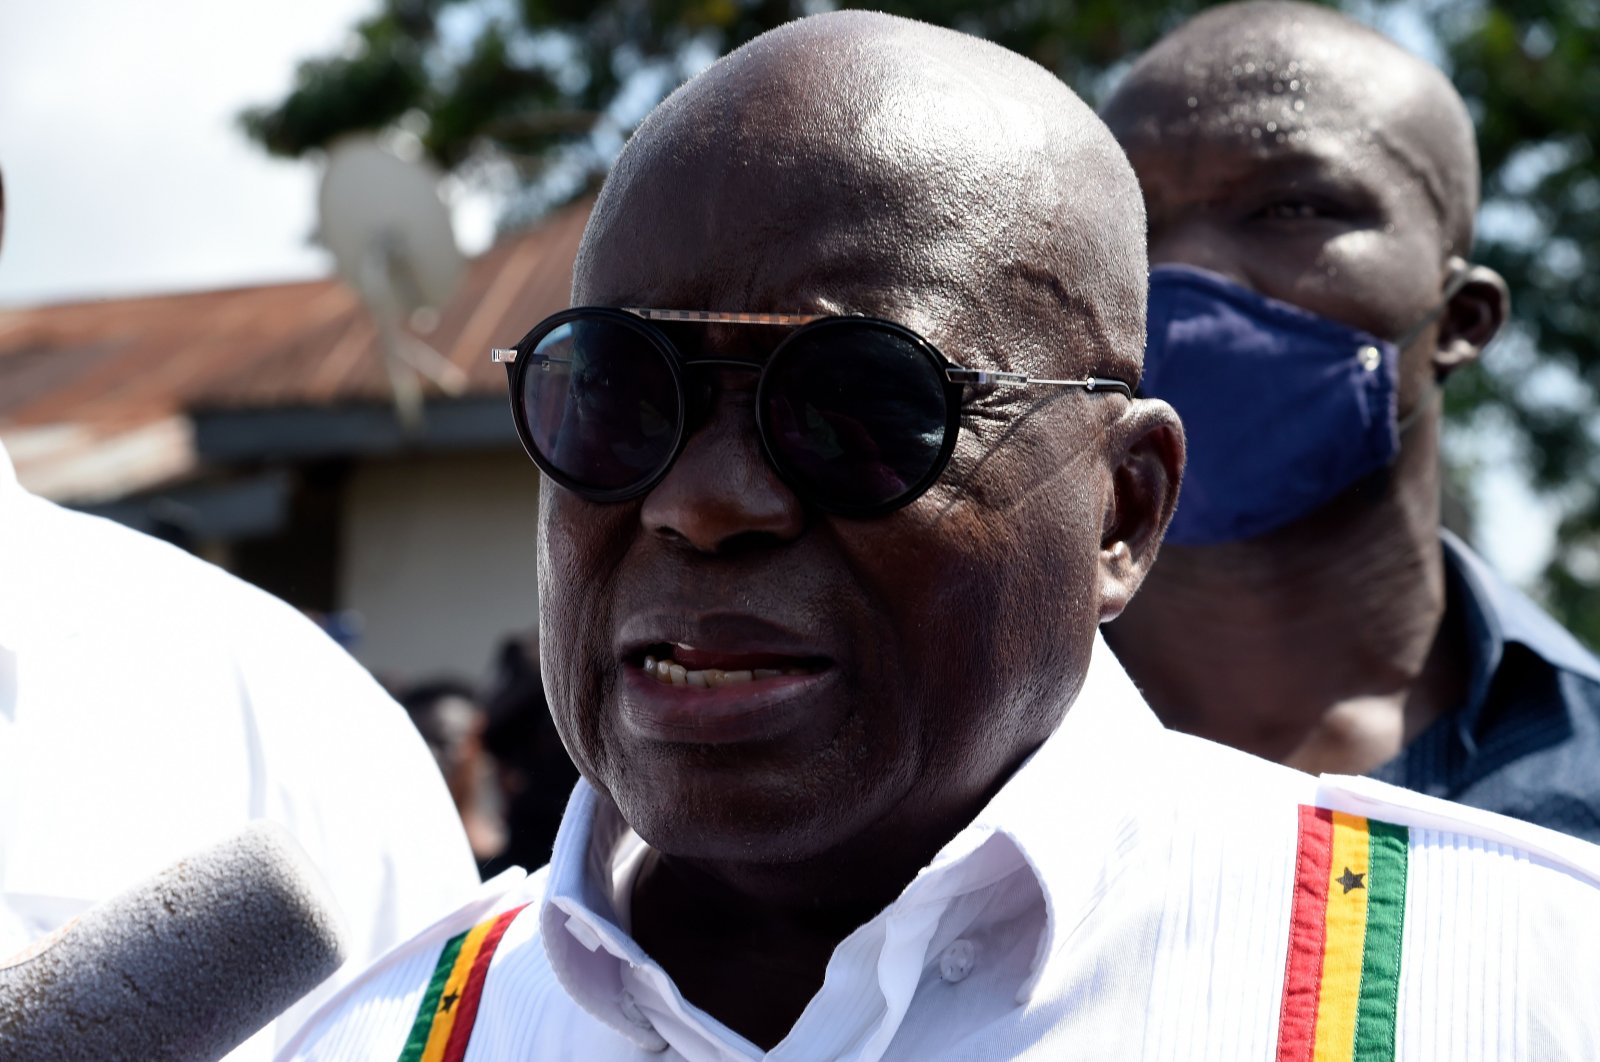 Ghanaian incumbent President Nana Akufo-Addo, and candidate of the ruling New Patriotic Party (NPP), speaks to the press after casting his vote at a polling station in the Eastern Region district of Kyebi, Dec. 7, 2020. (AFP Photo)